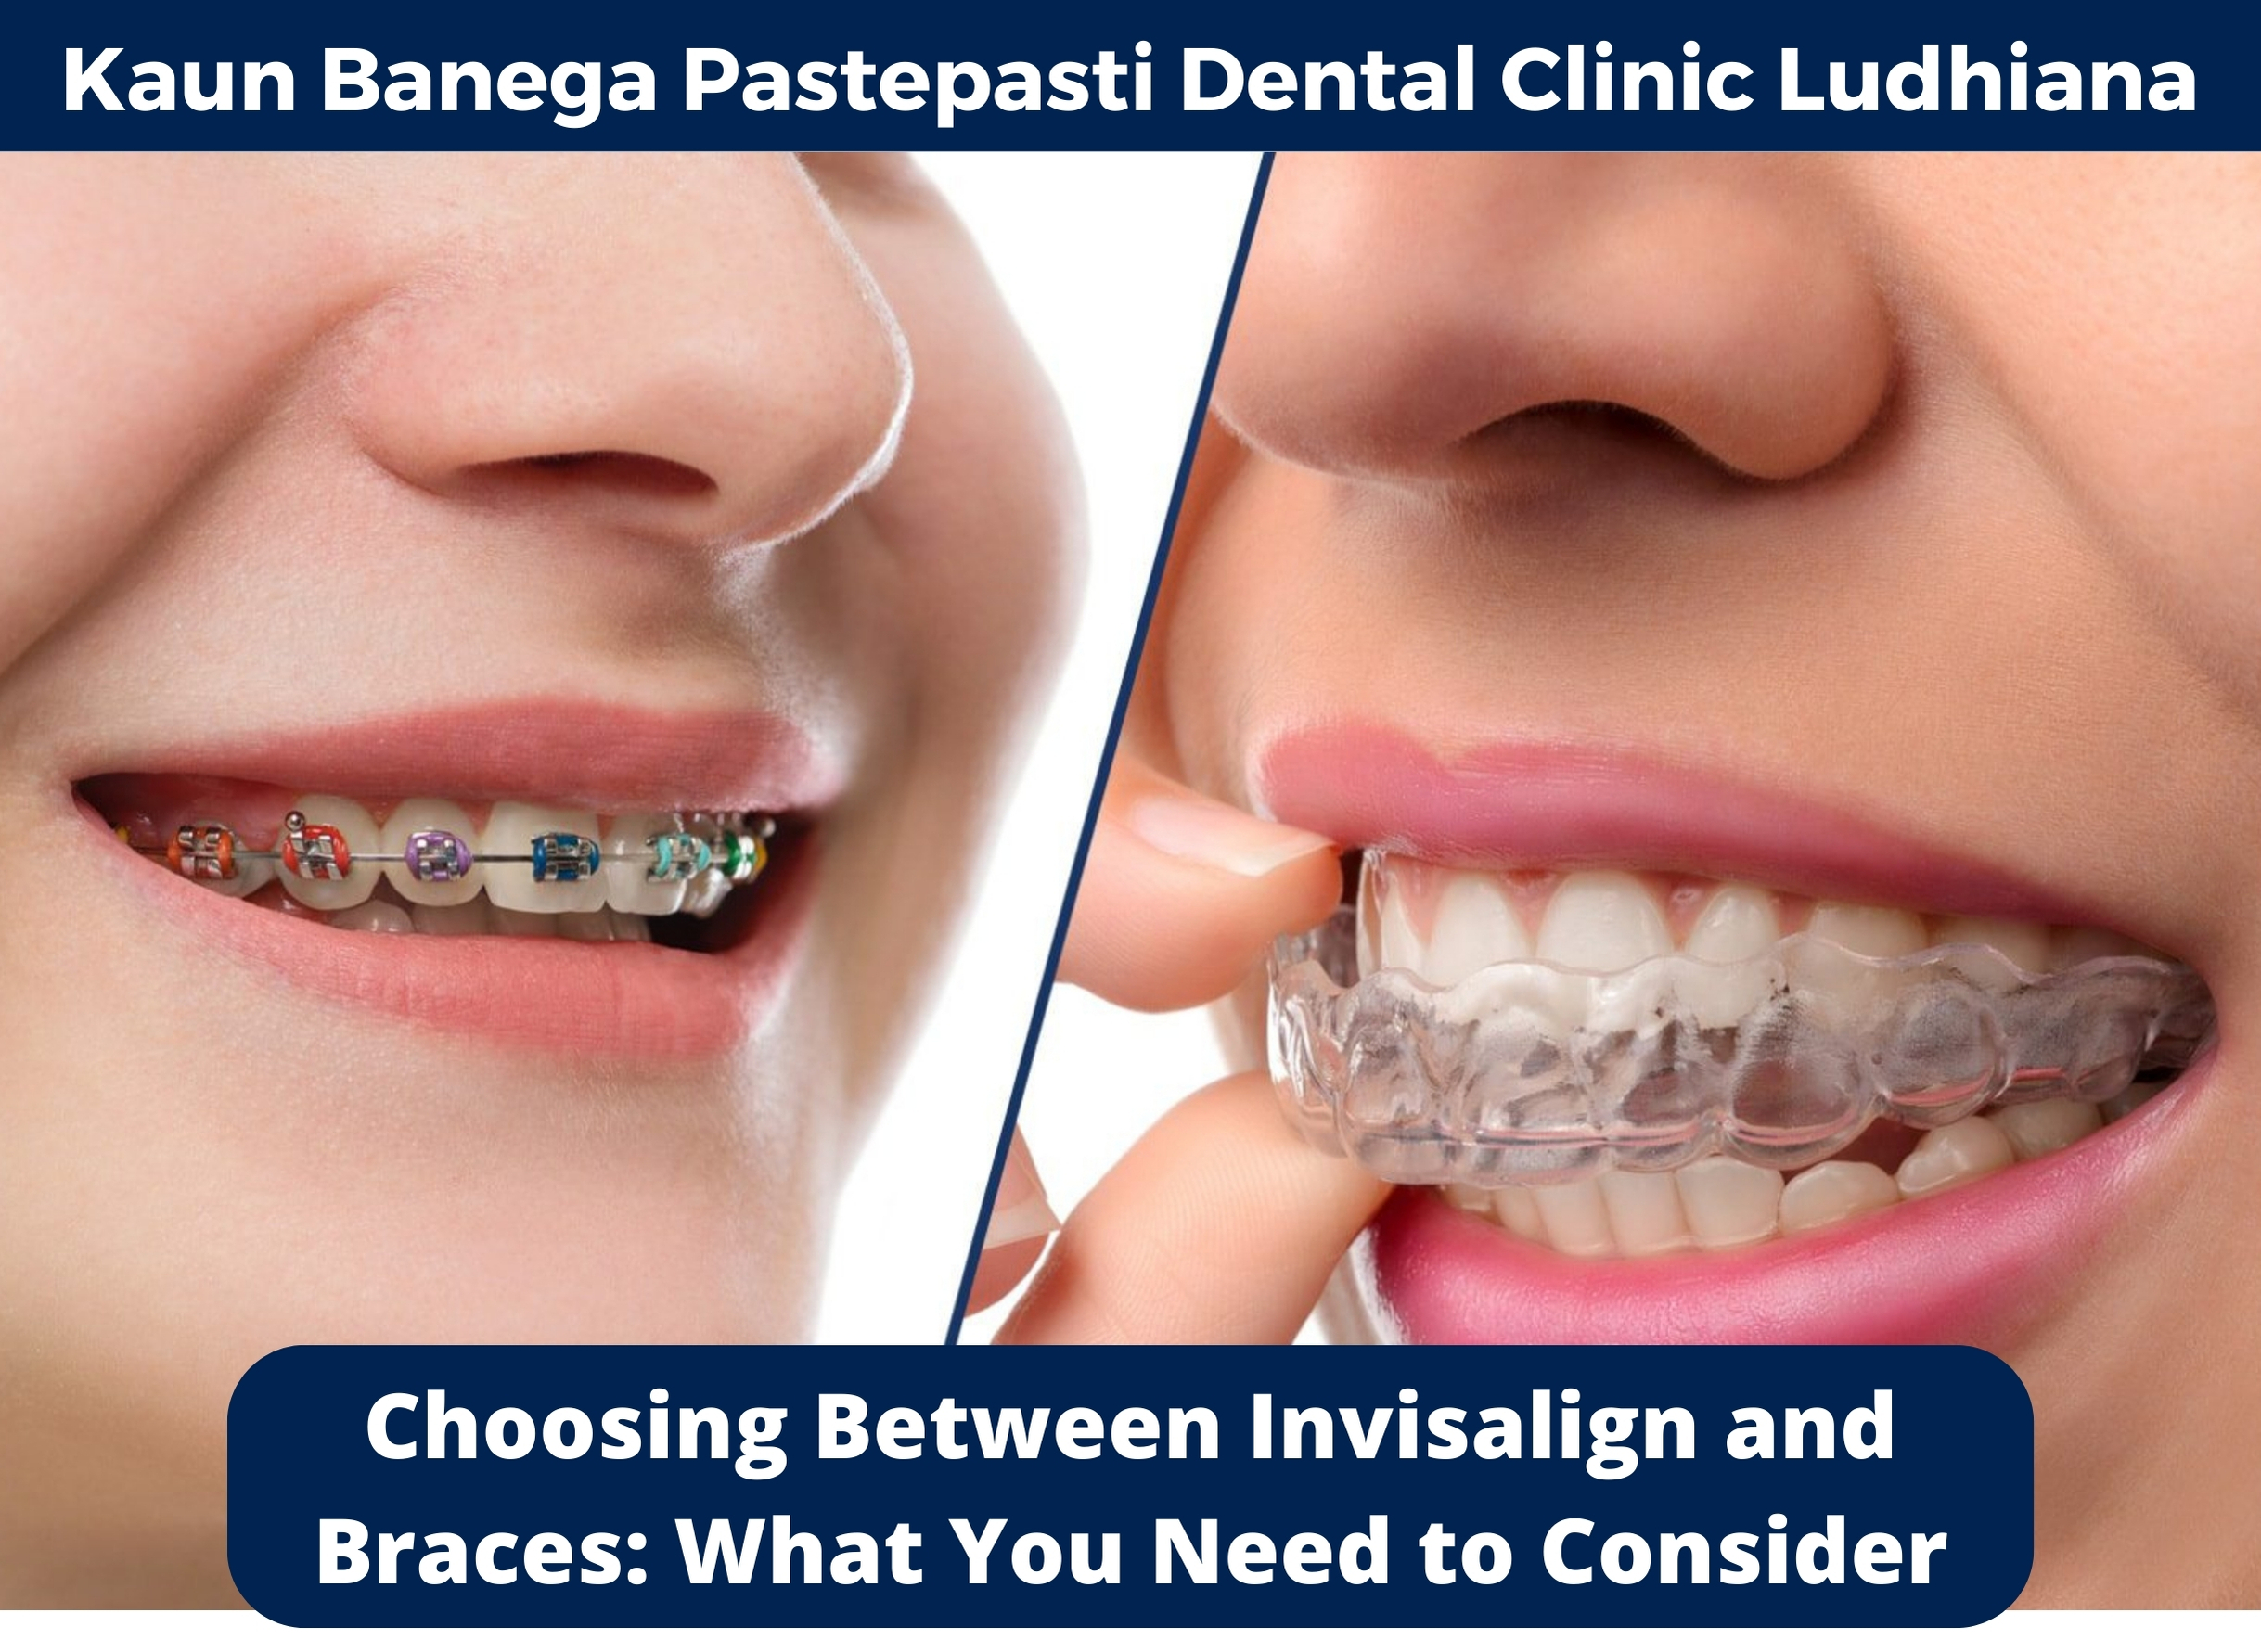 Choosing Between Invisalign and Braces: What You Need to Consider